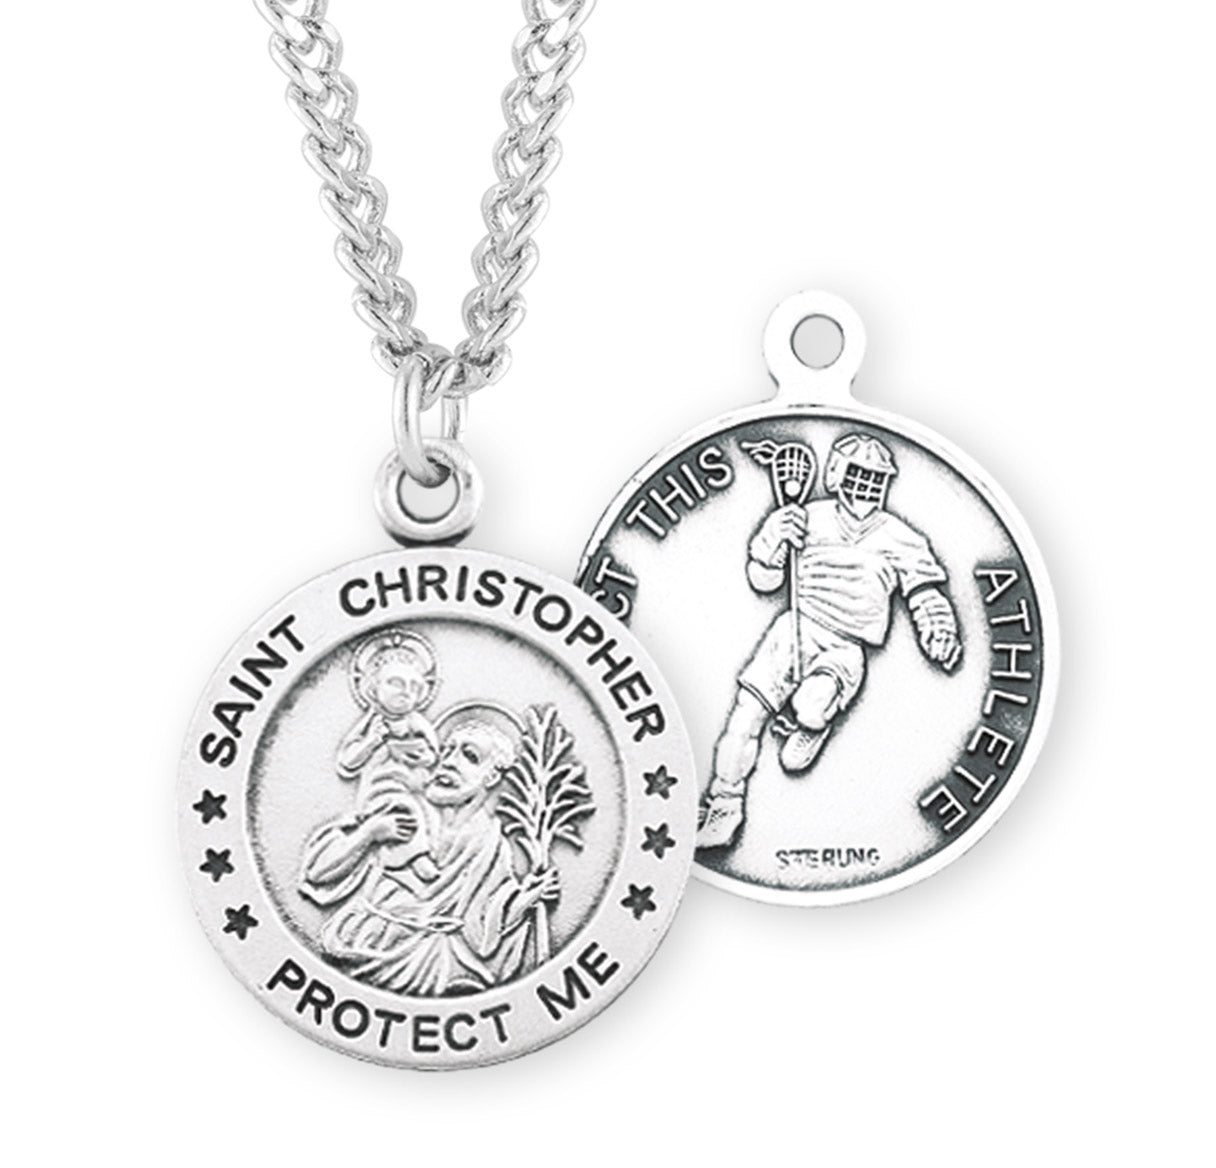 Saint Christopher Round Sterling Silver Lacrosse Male Athlete Medal